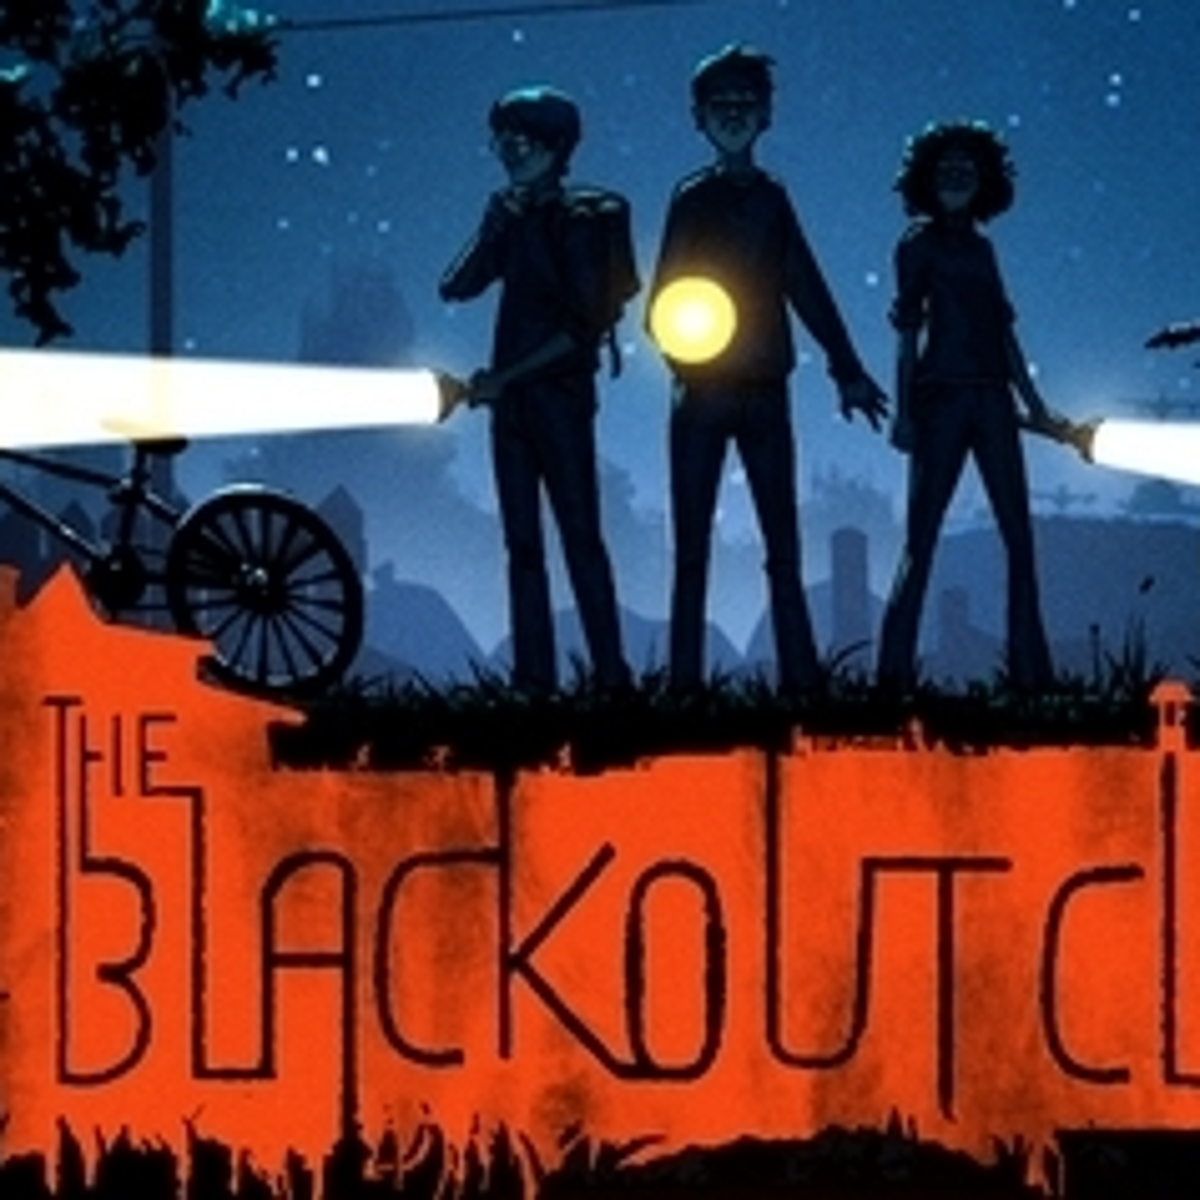 The Blackout Club review - a tense cooperative horror hampered by